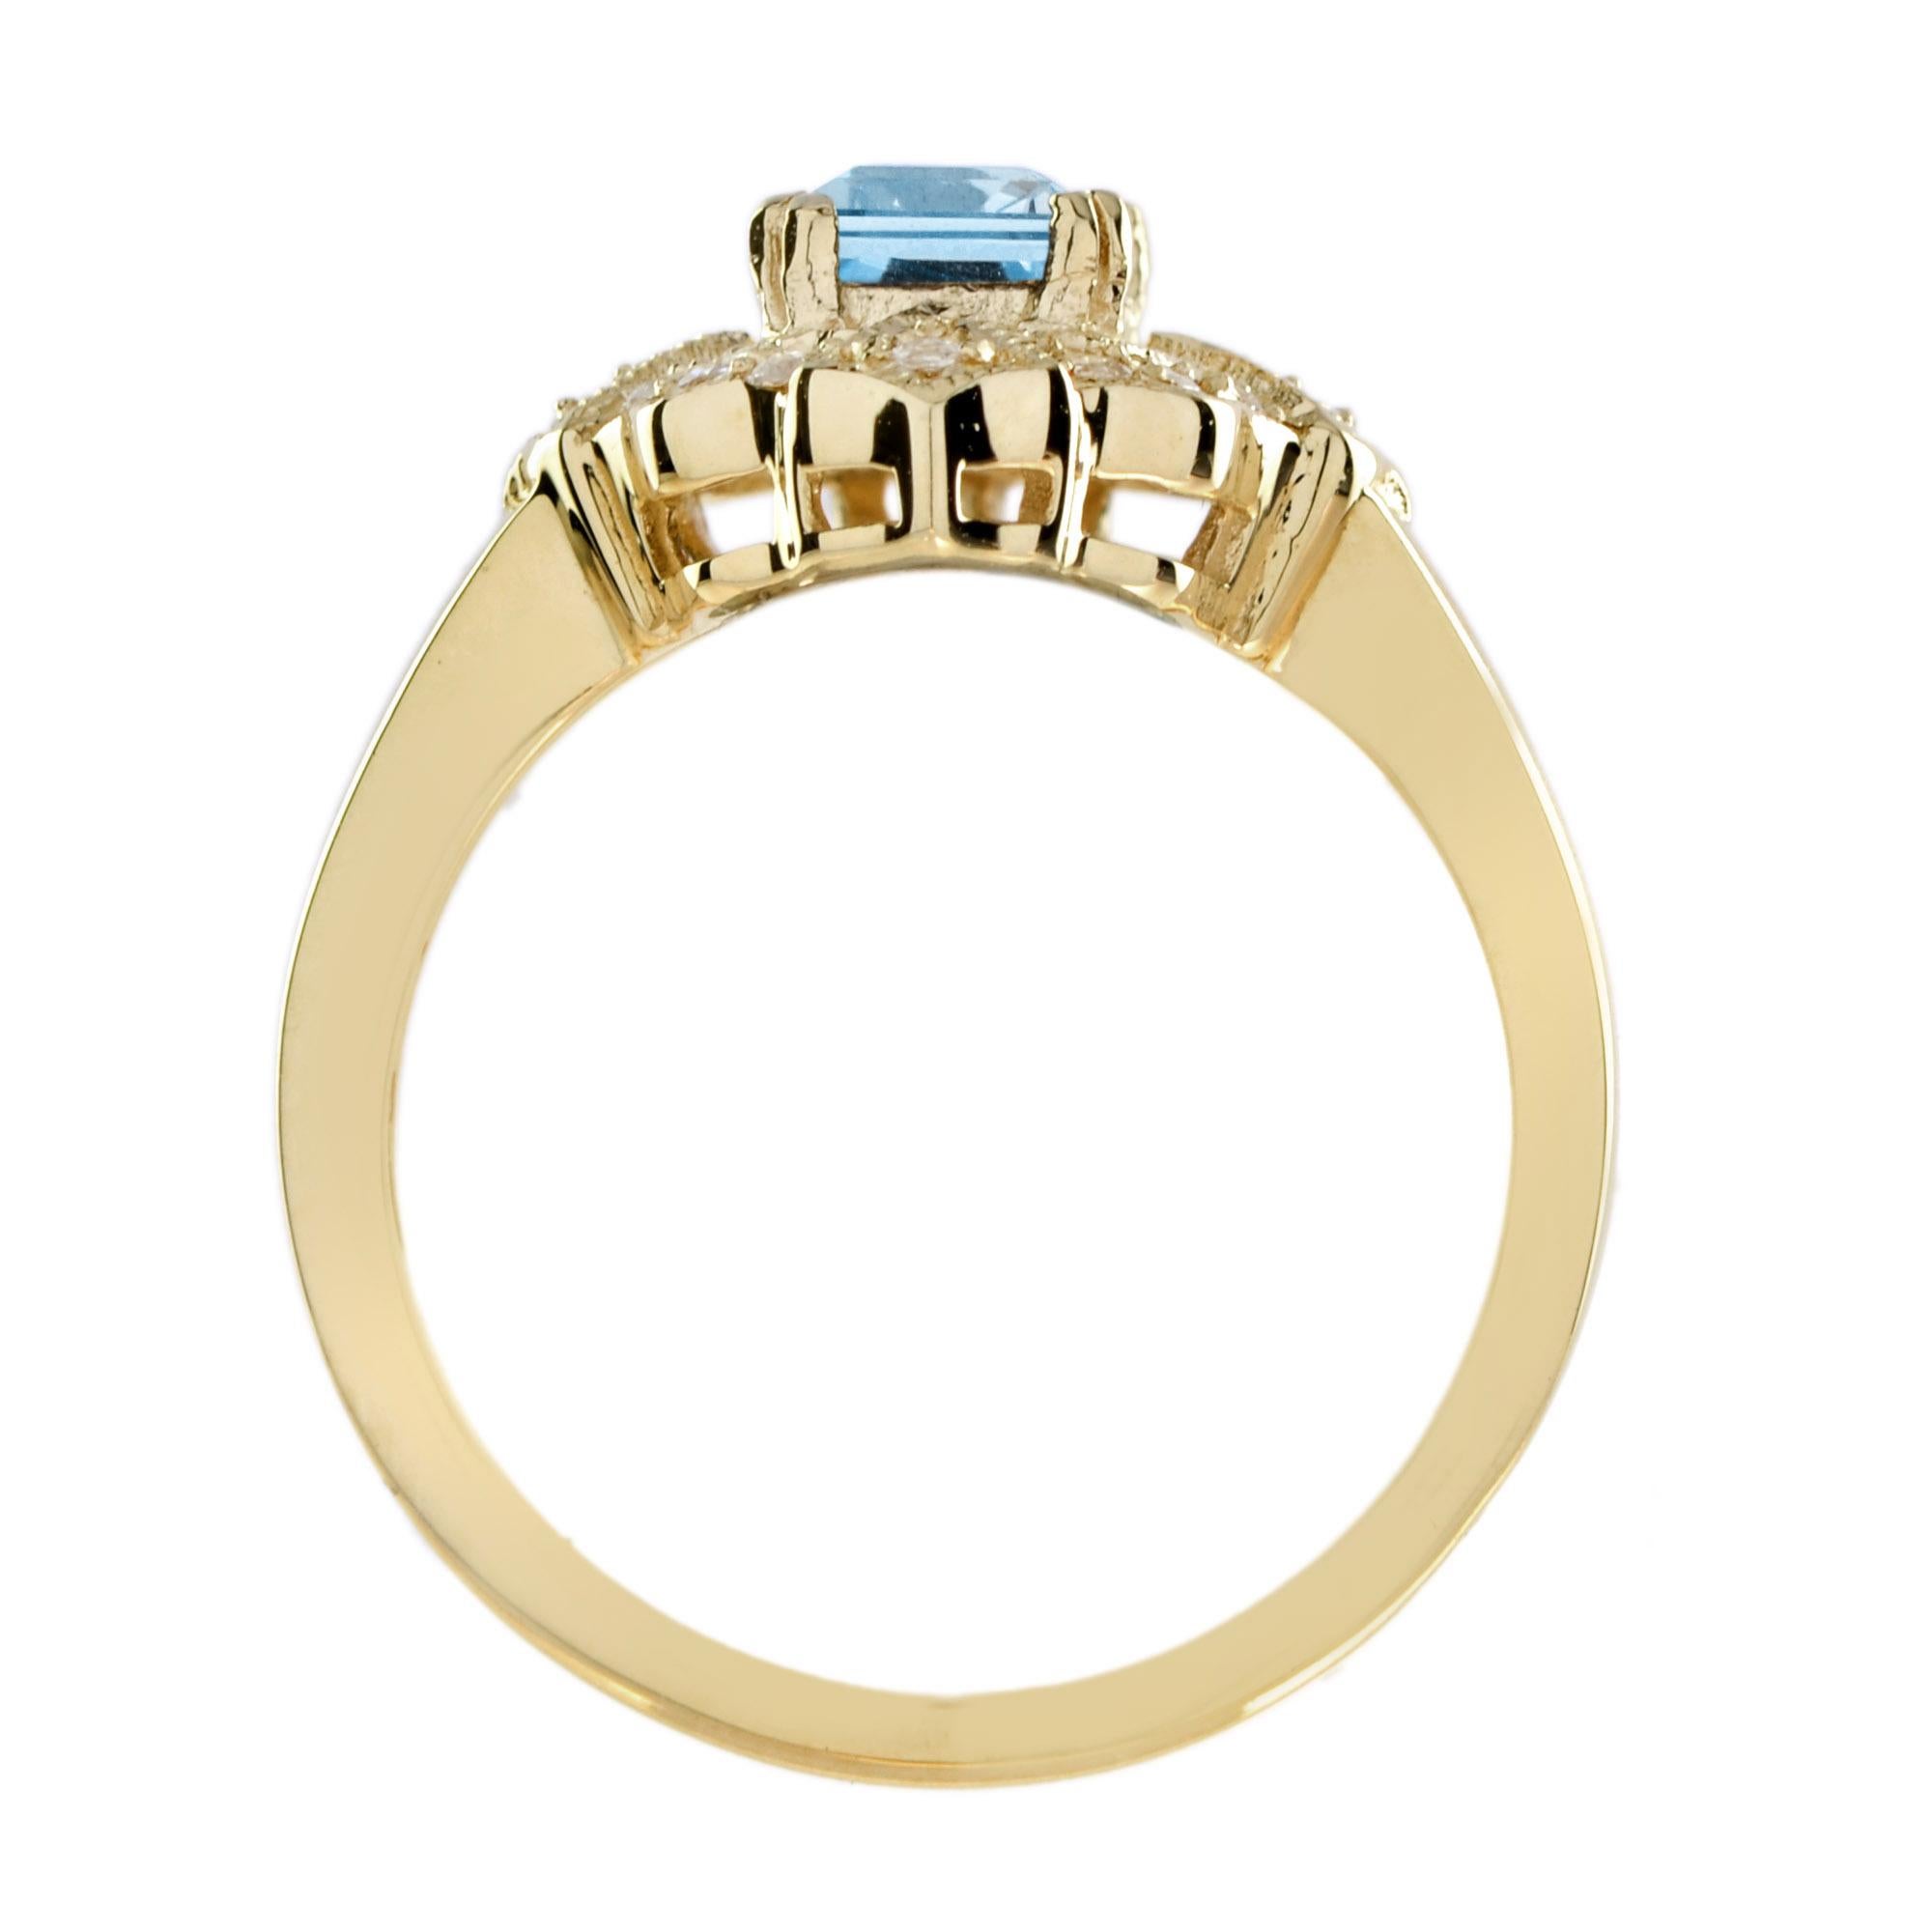 For Sale:  Emerald Cut Blue Topaz and Diamond Halo Vintage Style Ring in 14K Yellow Gold 3